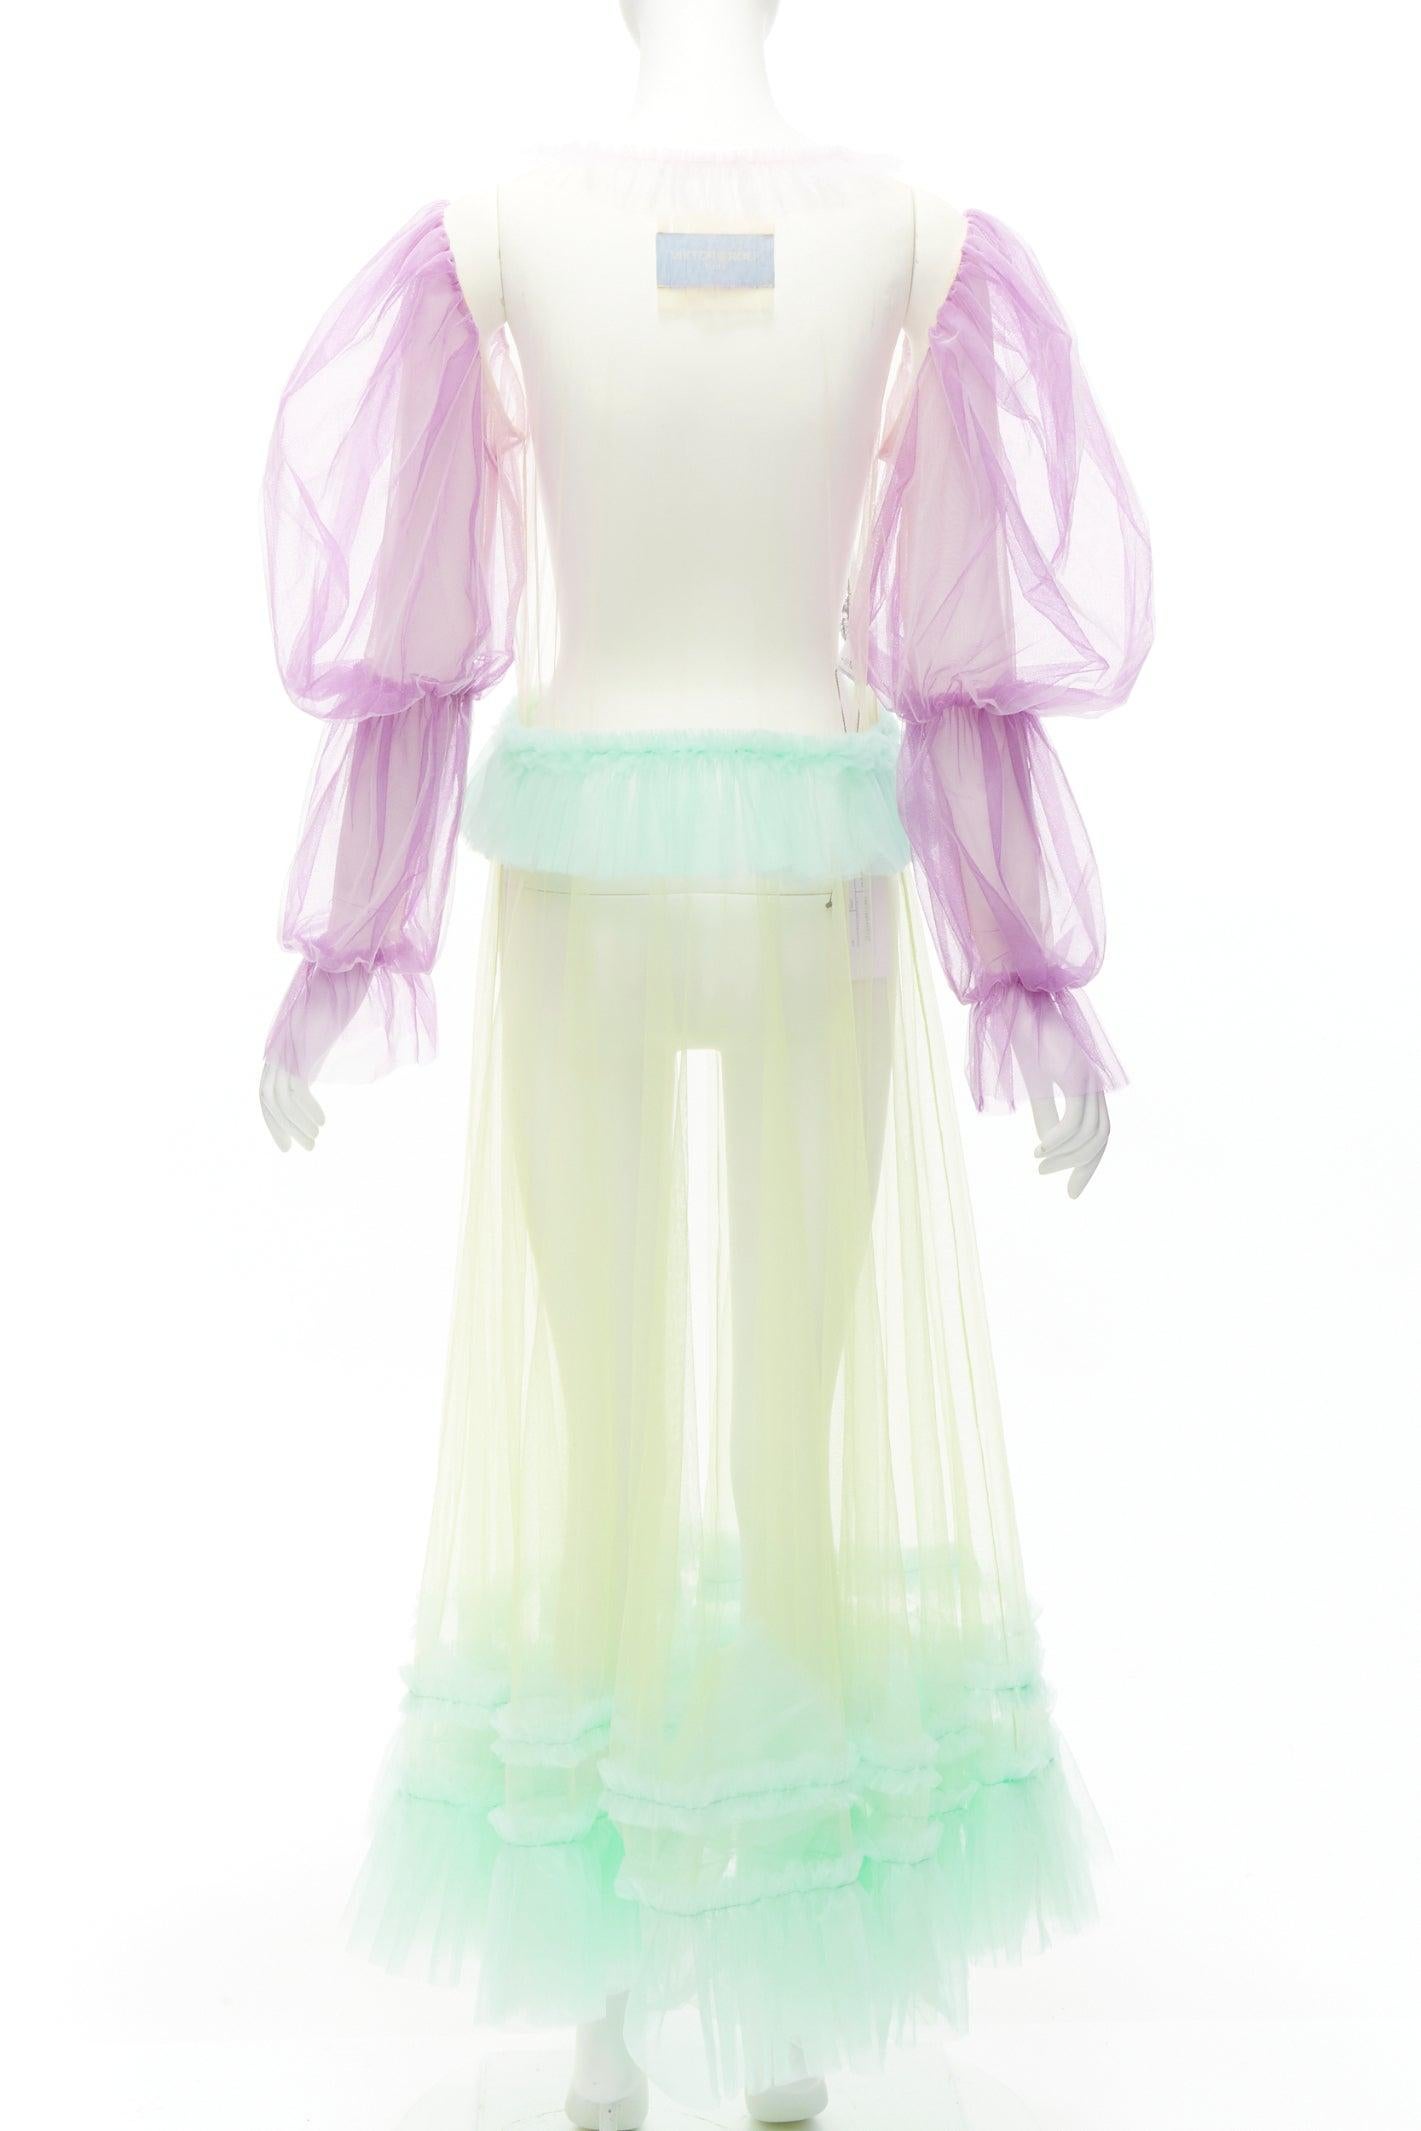 VIKTOR ROLF 2019 TULLE No Photos Please ruffle pastel puff sleeves sheer dress M For Sale 1